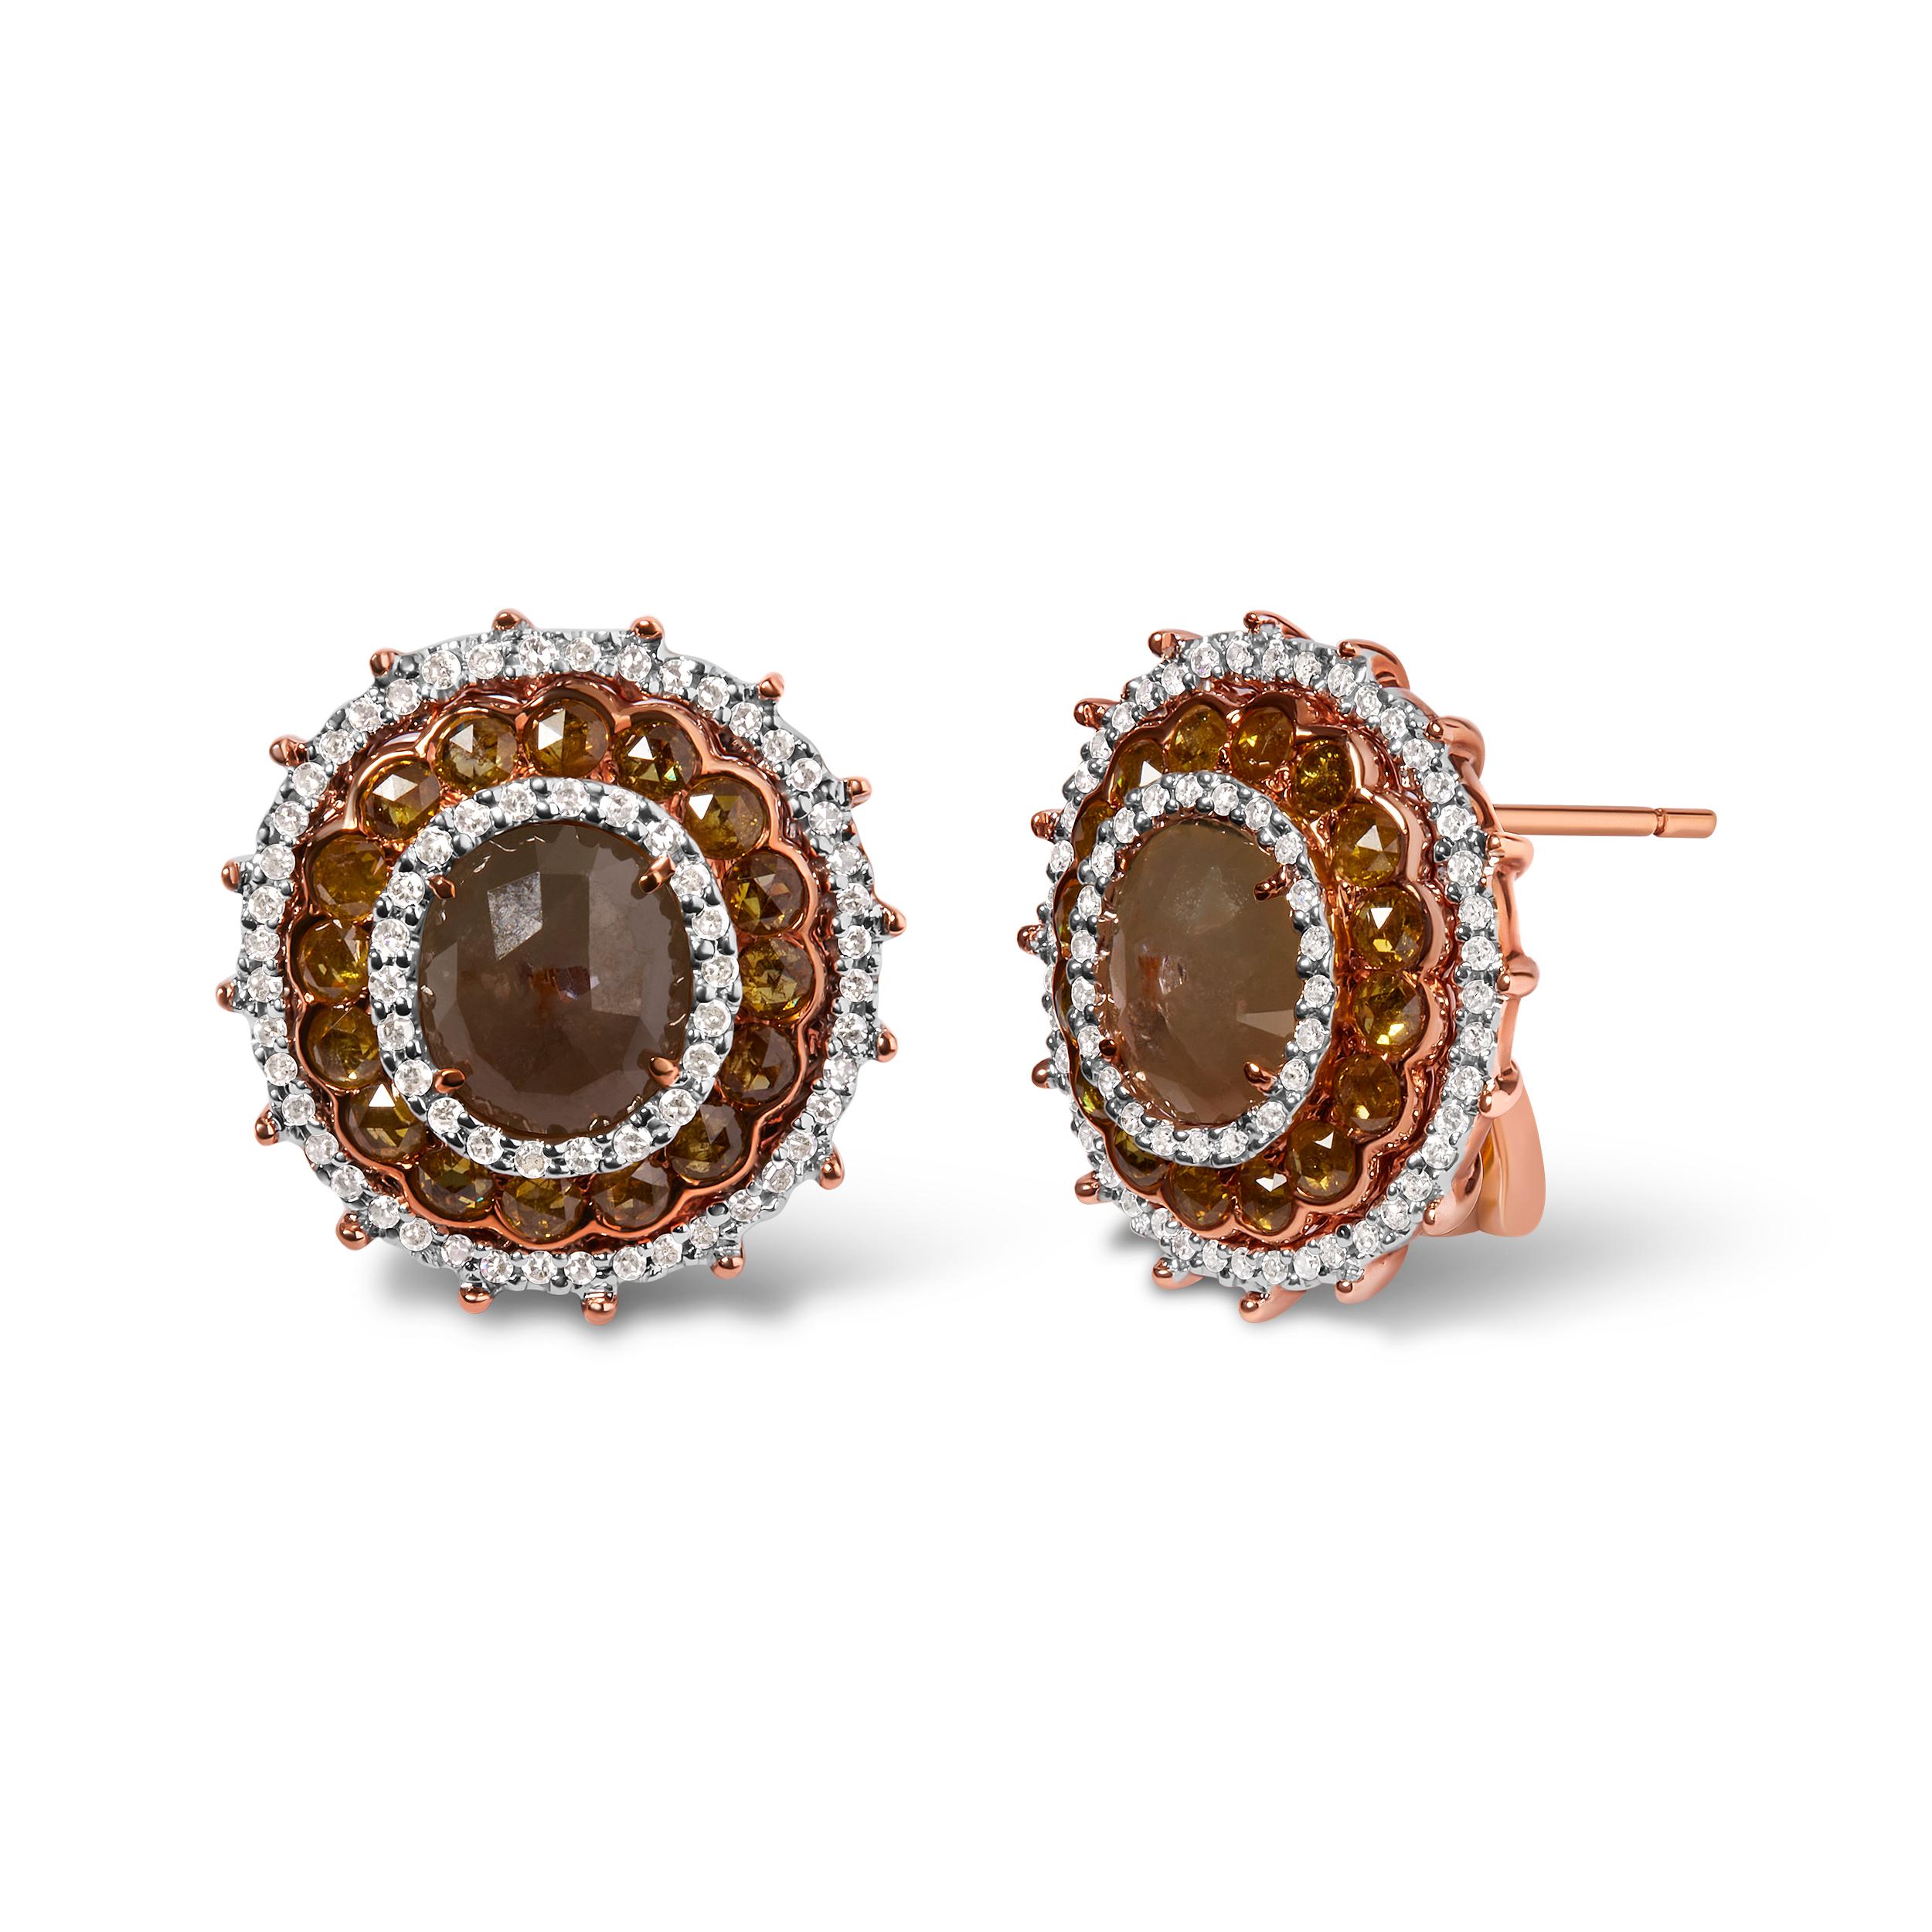 Introducing a dazzling masterpiece that will captivate your senses and elevate your style. These 14K Rose Gold Fancy Rose Cut Diamond Circle Shaped Triple Halo Stud Earrings are a true testament to exquisite craftsmanship. Adorned with a remarkable